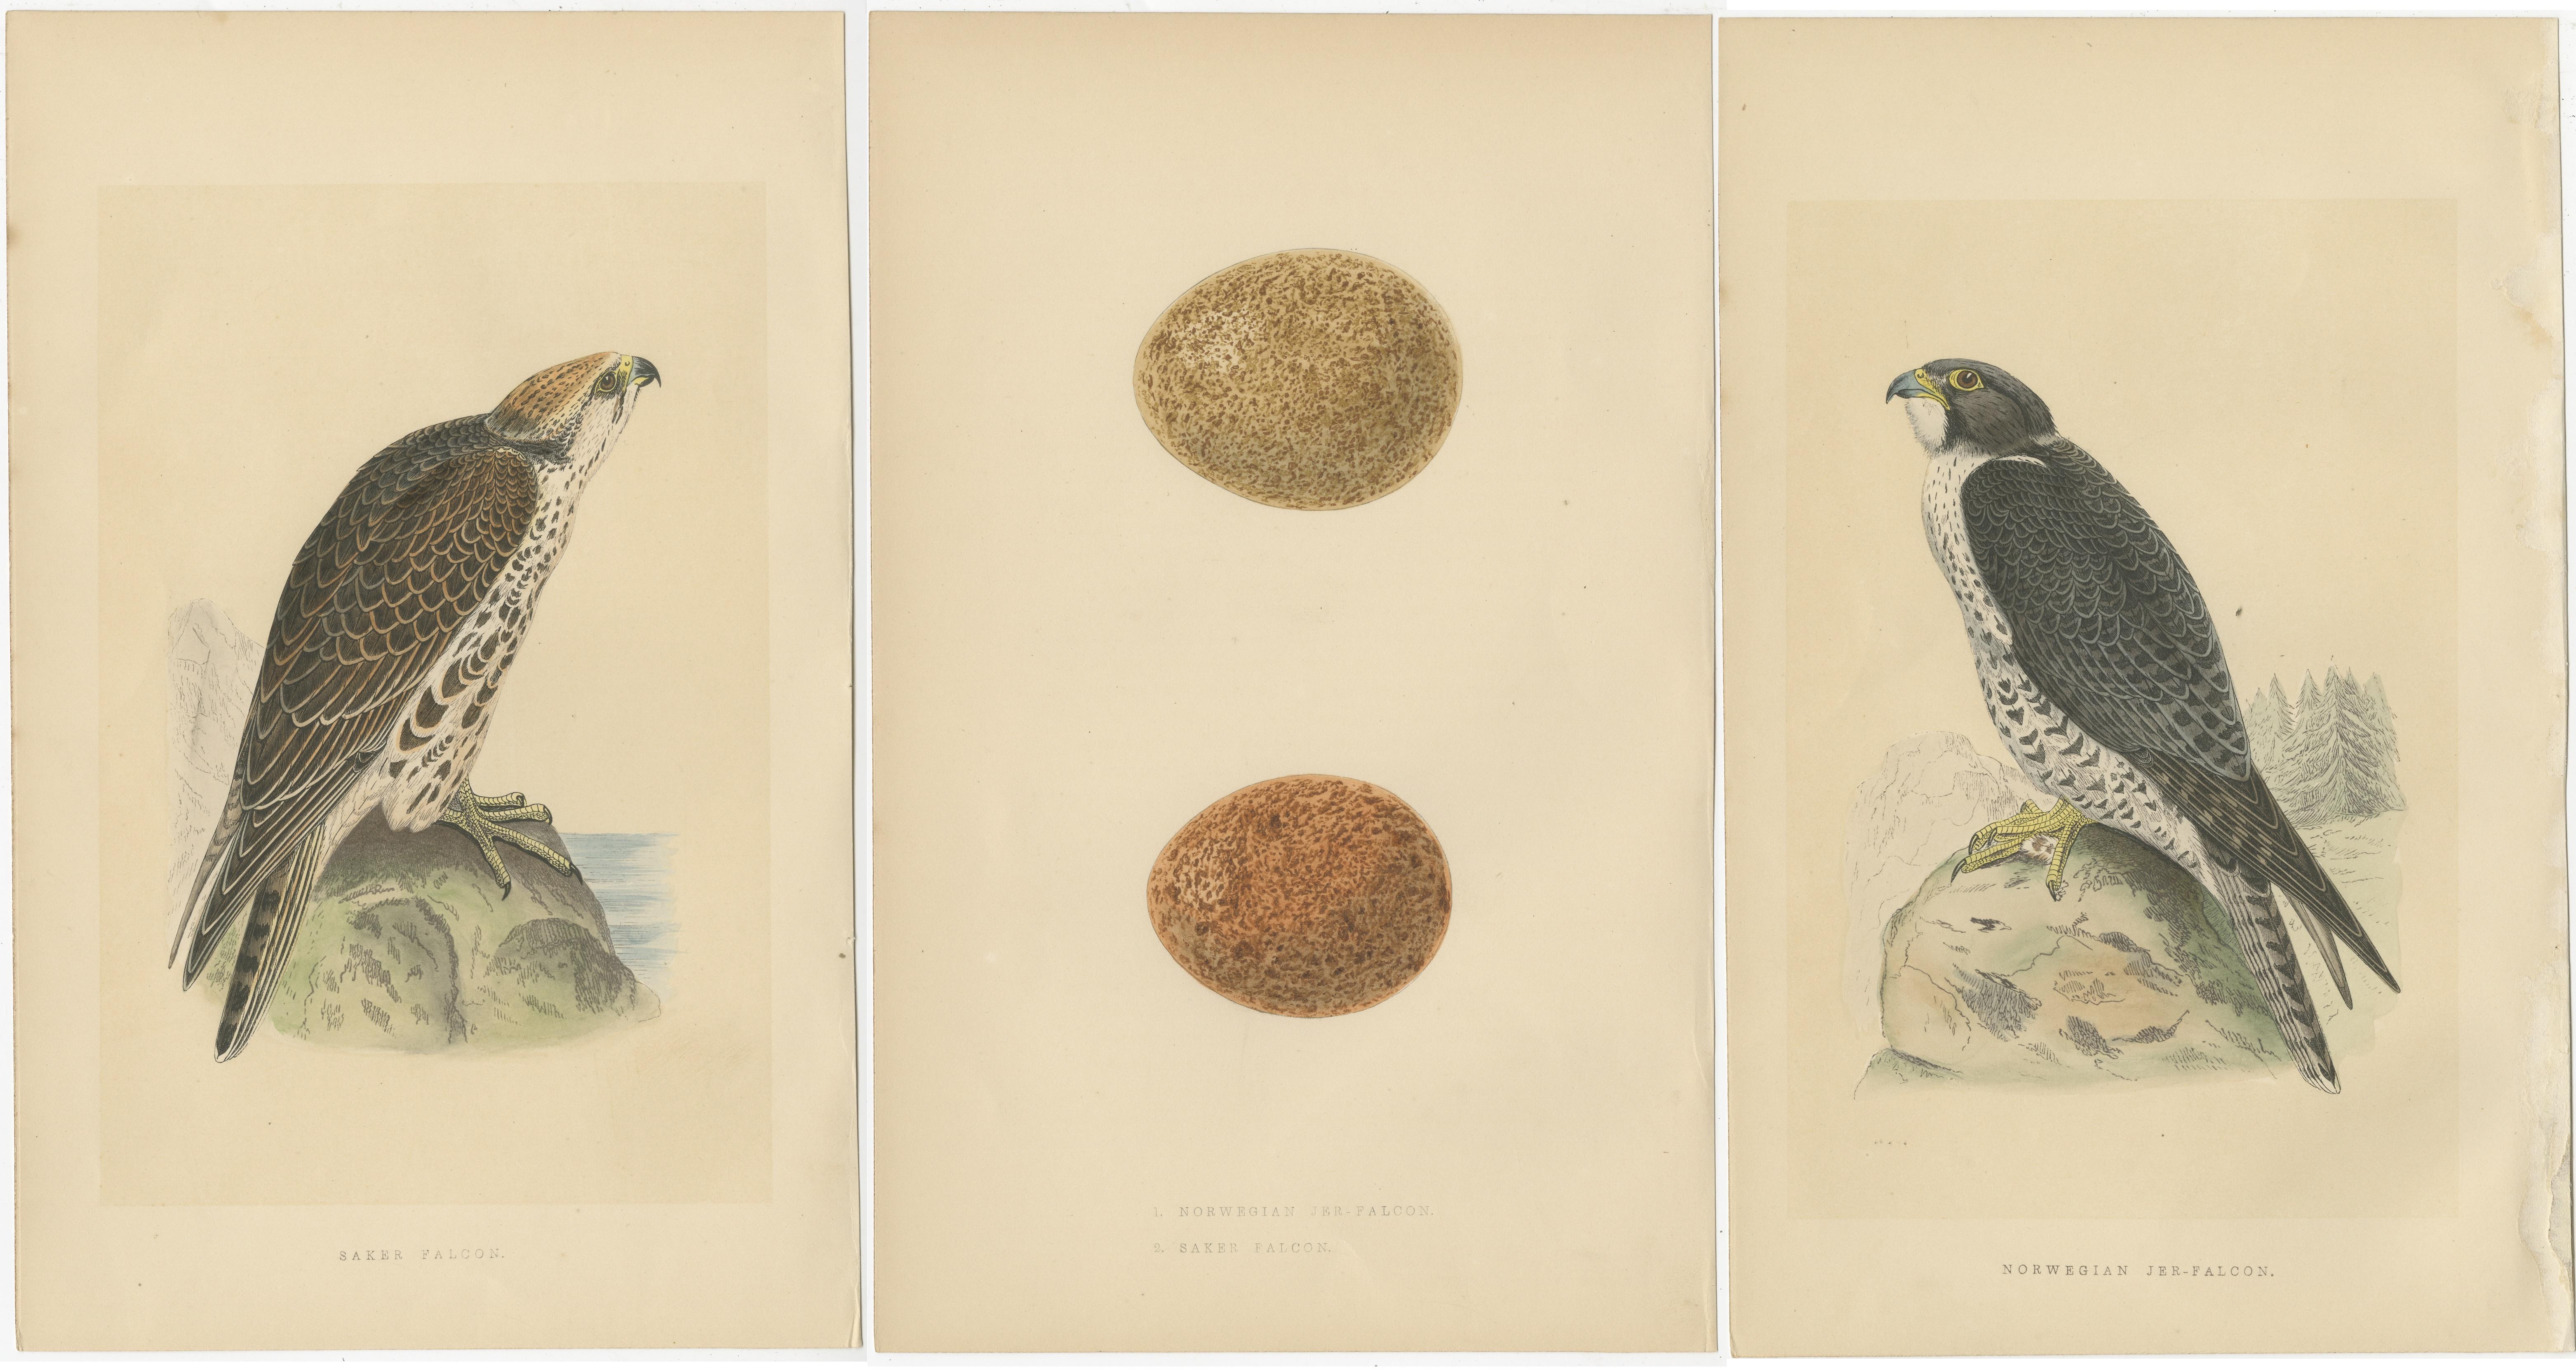 These antique bird prints are part of a set of three depicting a saker falcon, Norwegian jer-falcon, and their eggs. They originate from the book titled 'A history of the birds of Europe, not observed in the British Isles,' authored by Charles